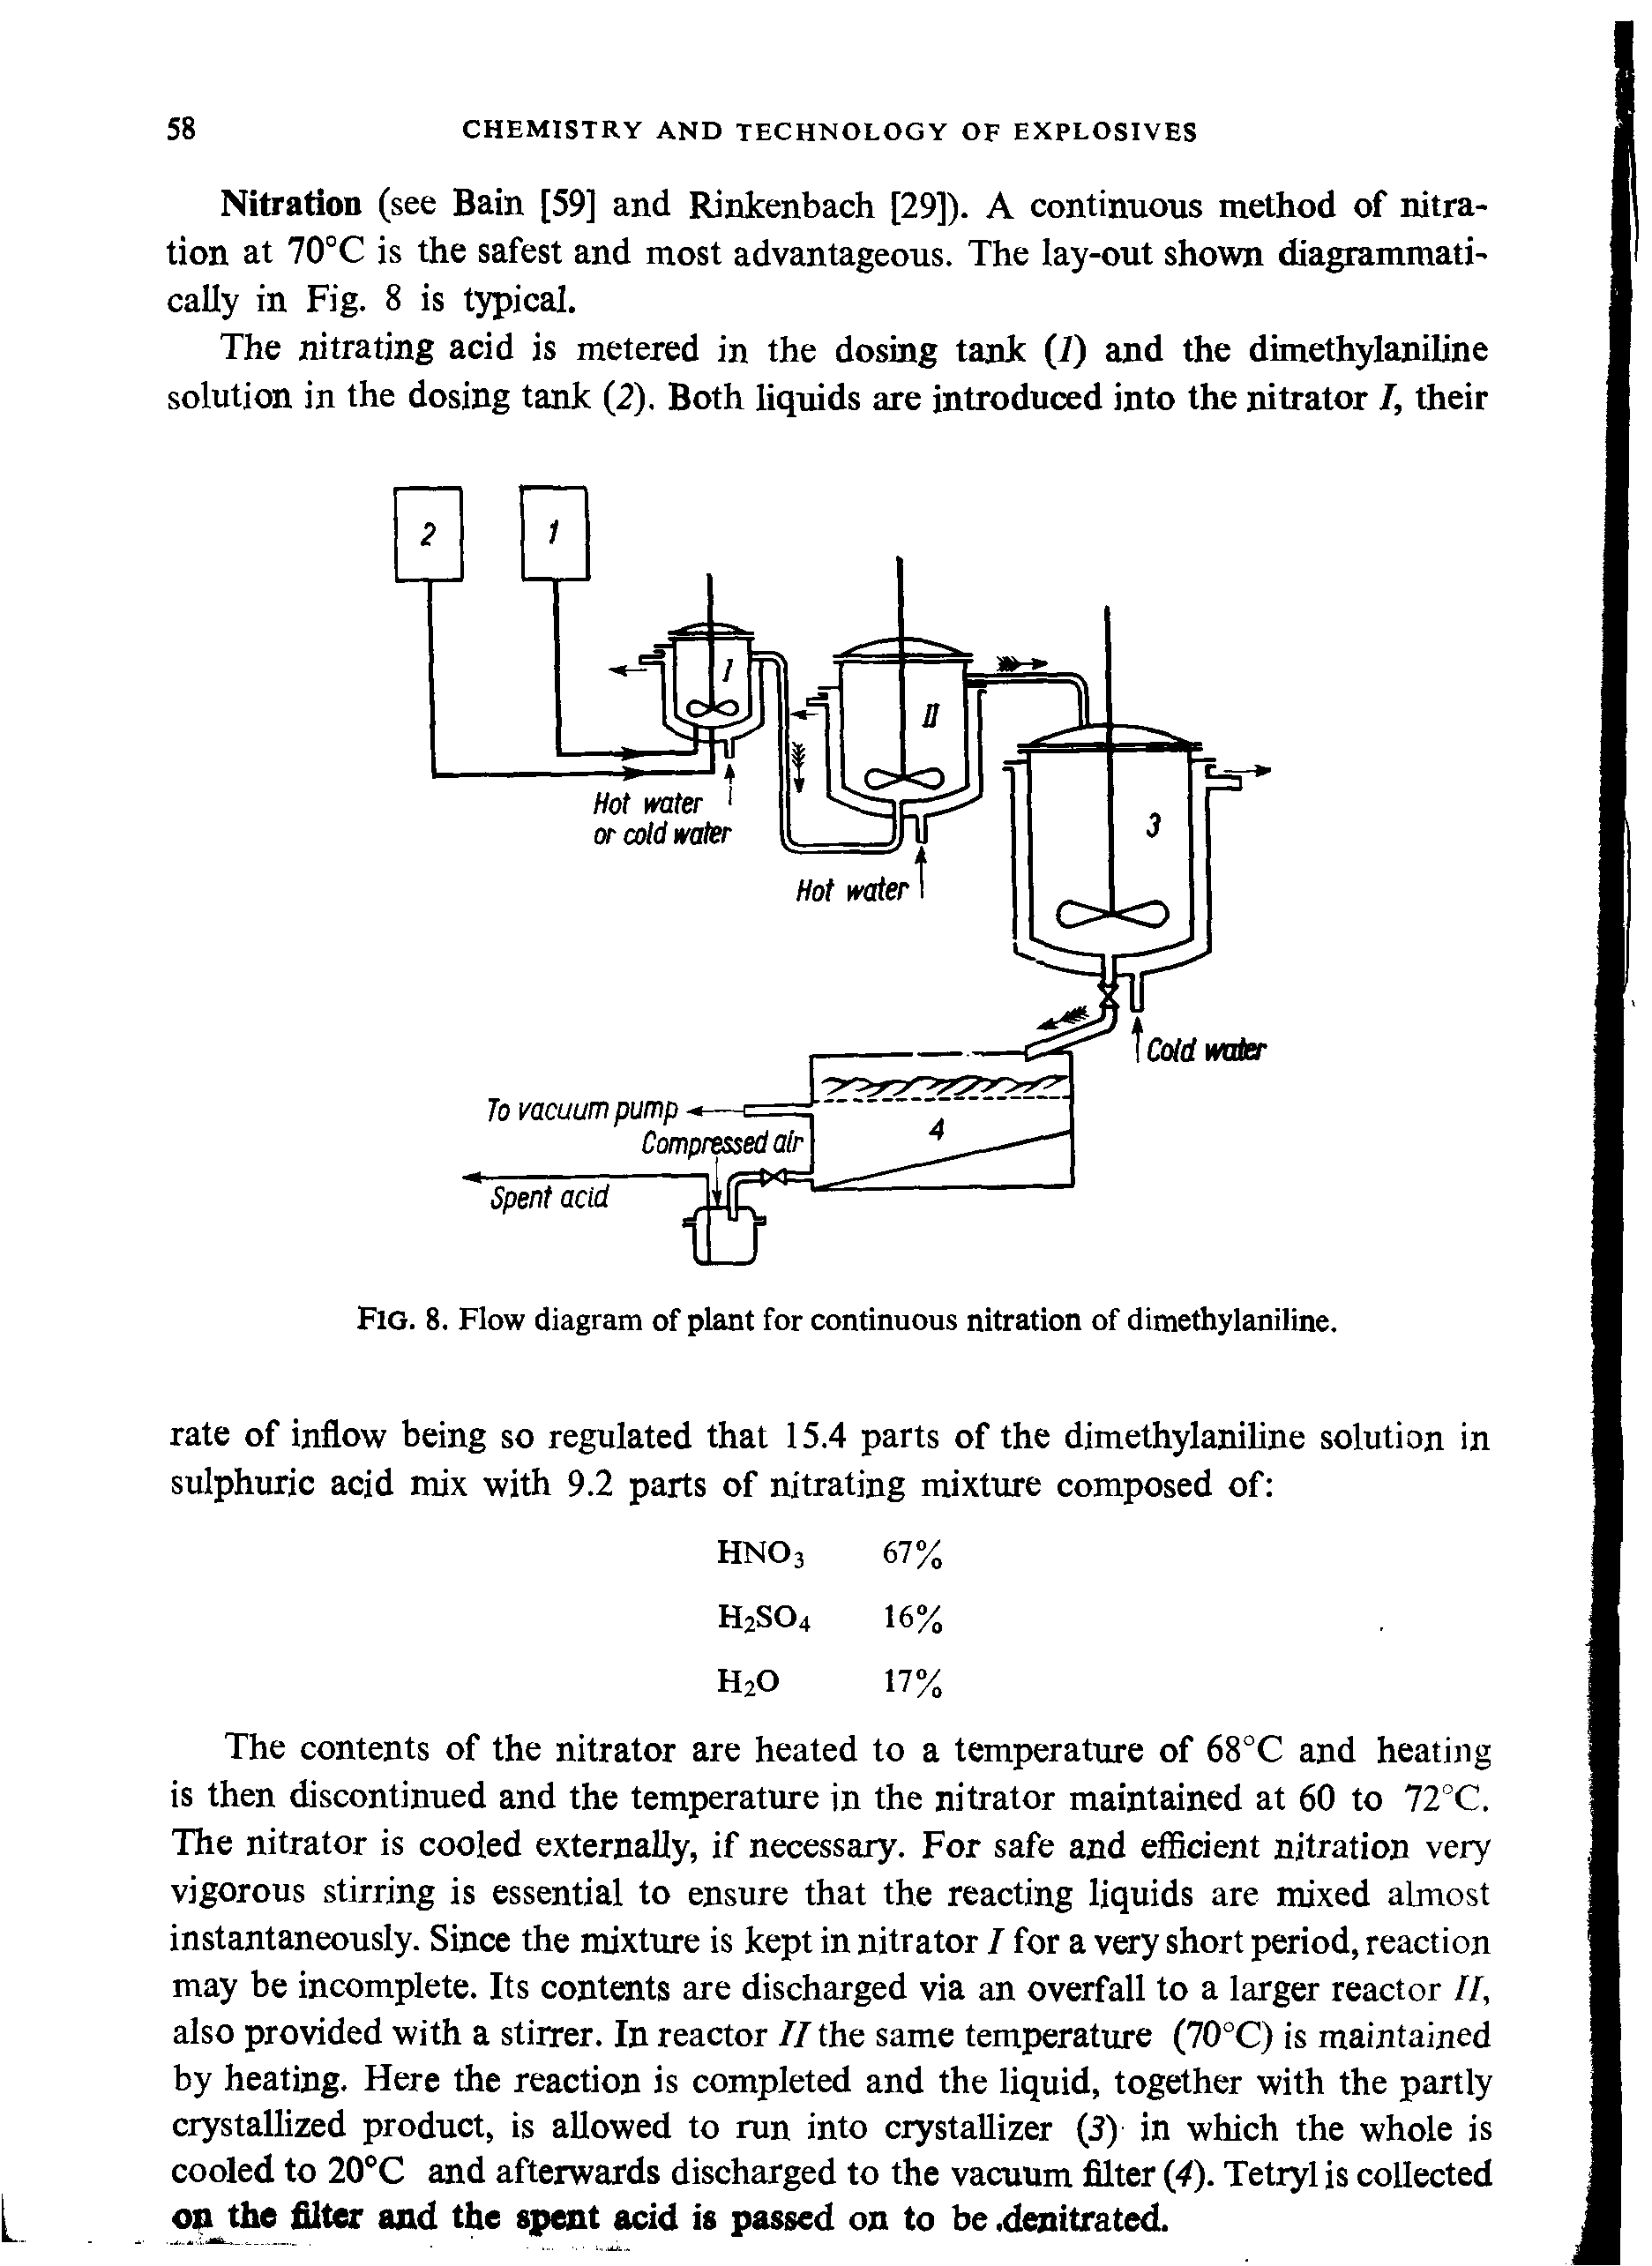 Fig. 8. Flow diagram of plant for continuous nitration of dimethylaniline.